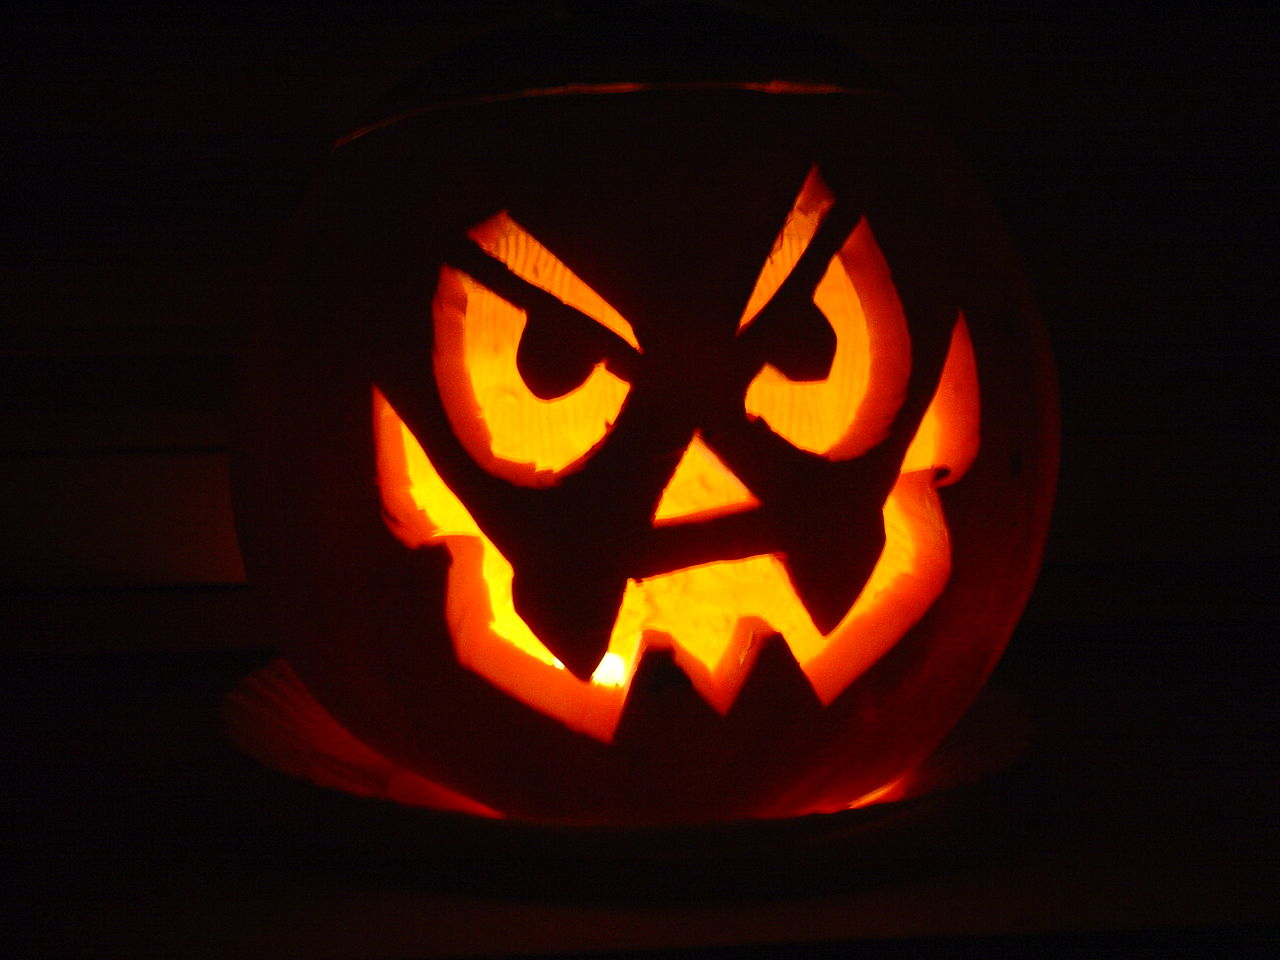 photo of a jack o lantern with a mischievious face, illuminated from within on a black background